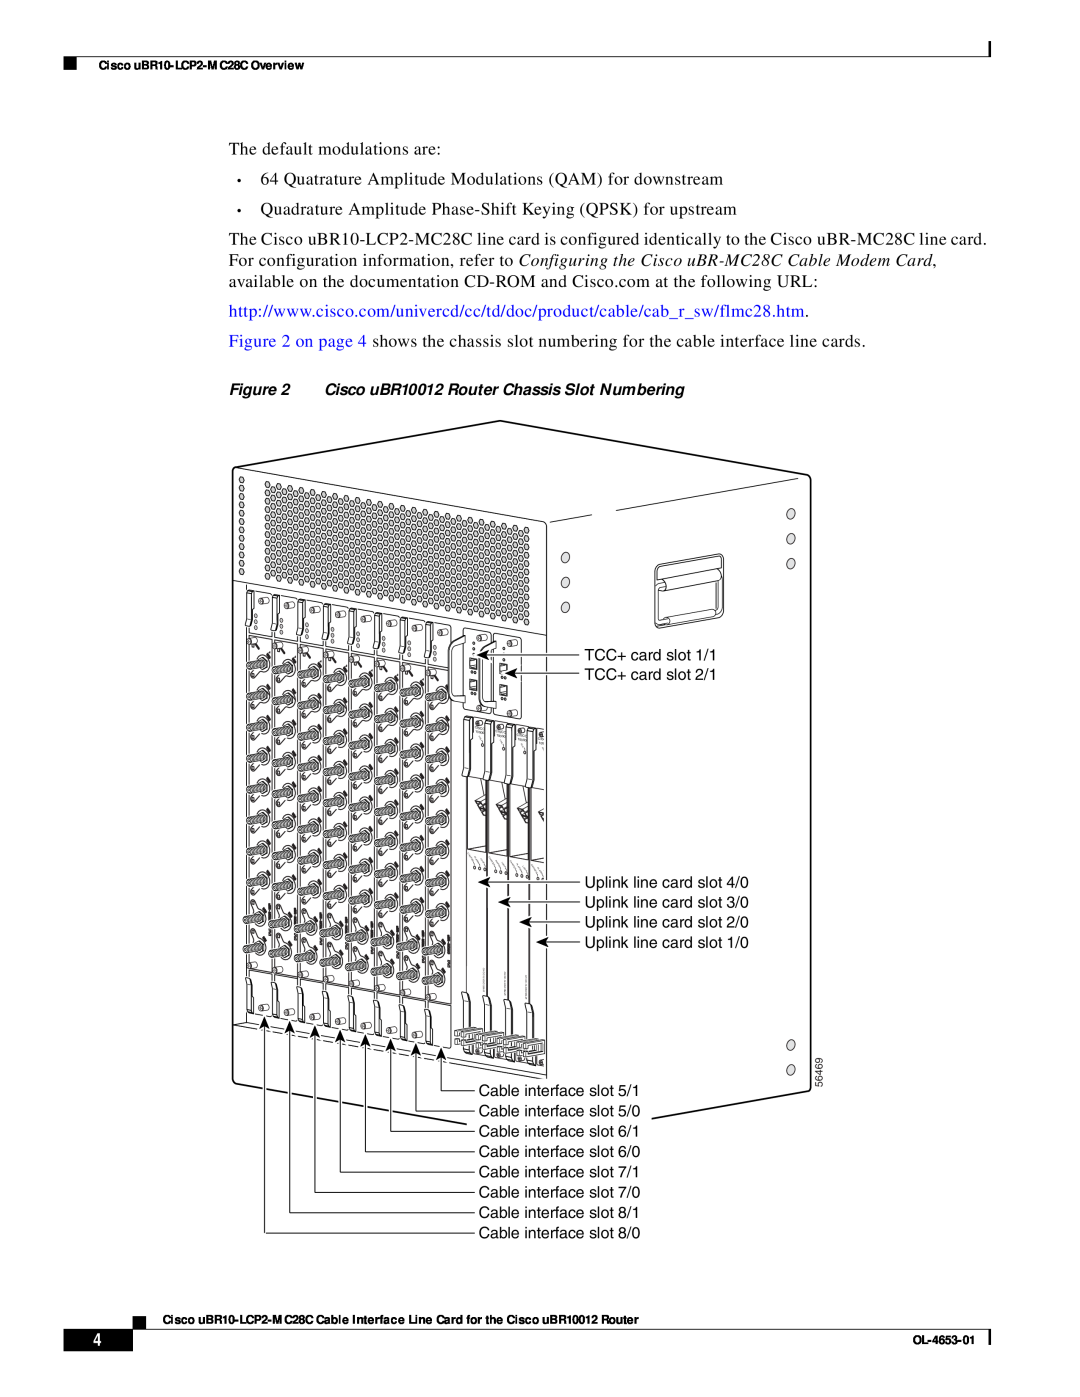 Cisco Systems uBR10-LCP2-MC28C manual The default modulations are 